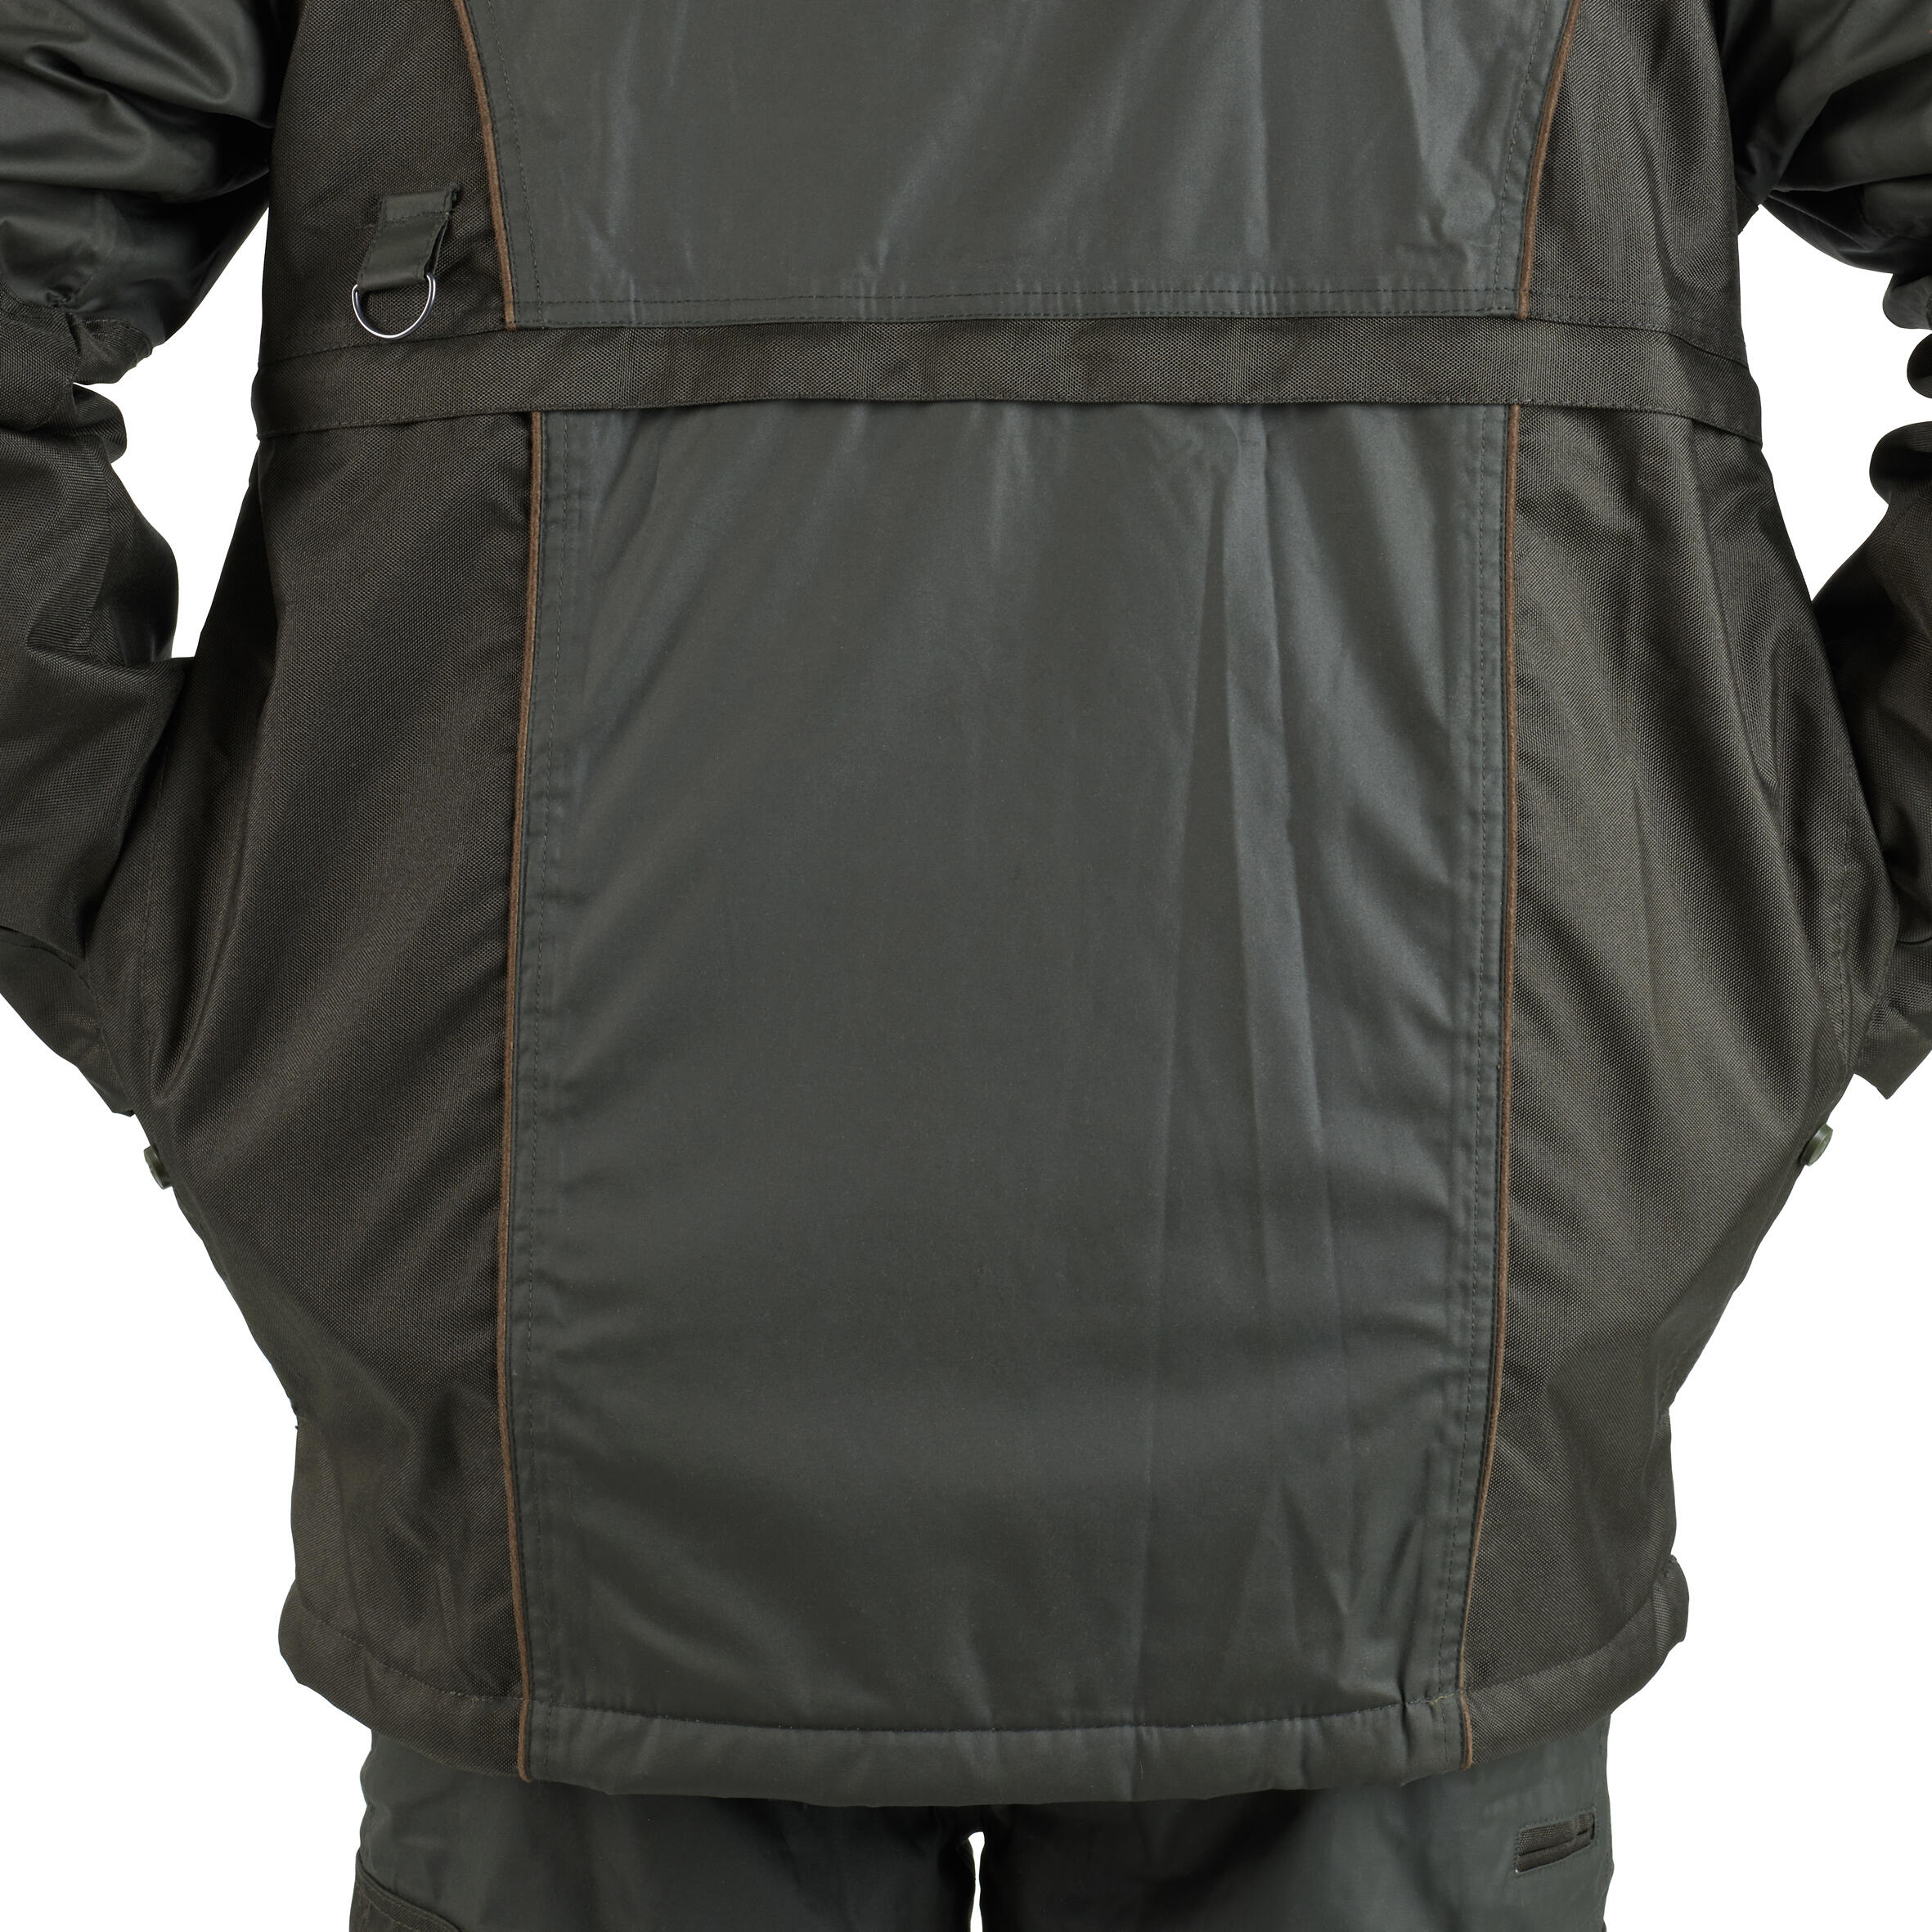 Hunting waterproof robust jacket Percussion Impertane - Green 7/13